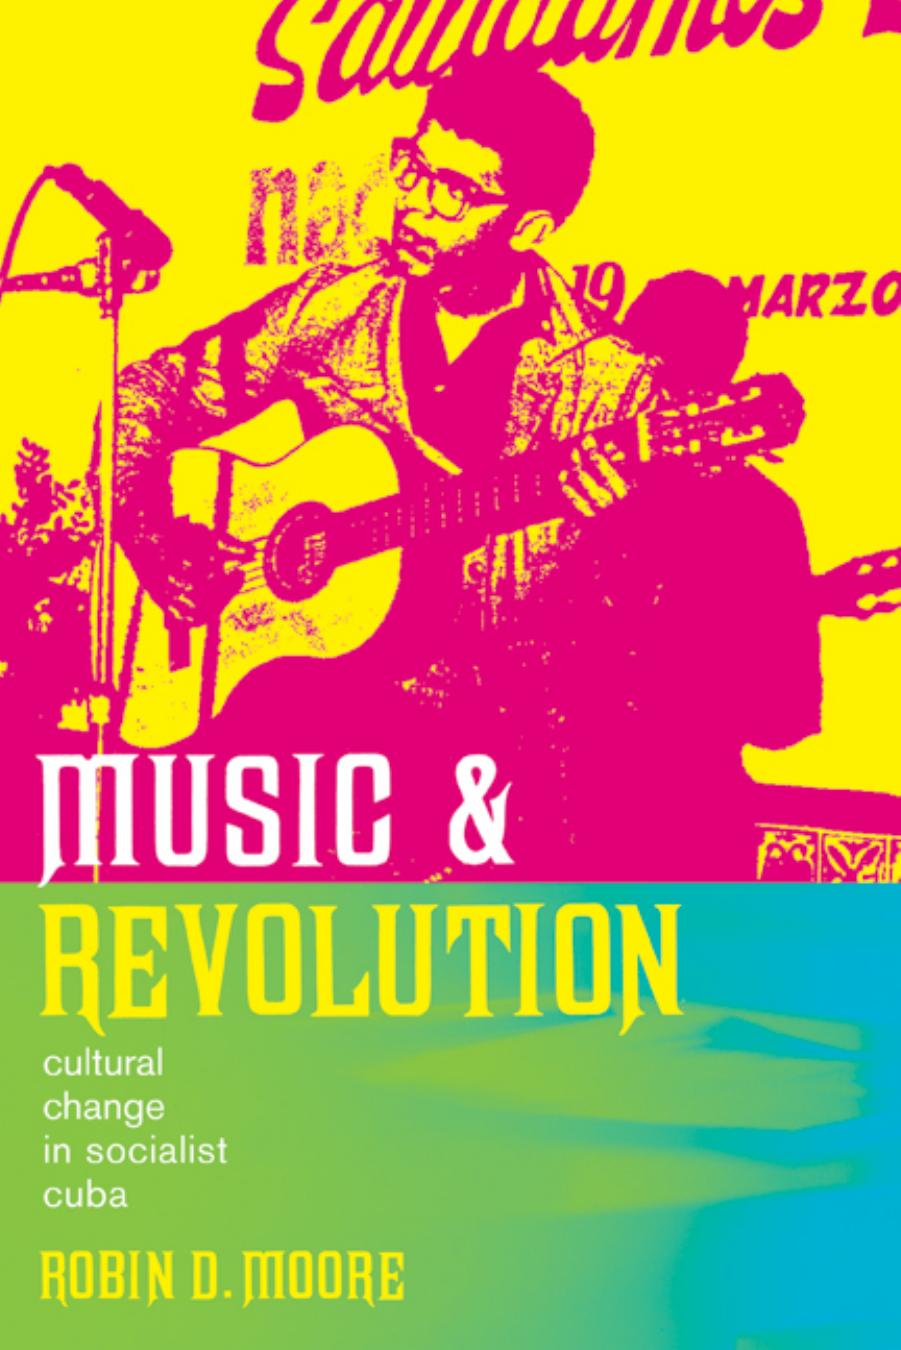 Music and revolution  cultural change in socialist Cuba by Robin D. Moore